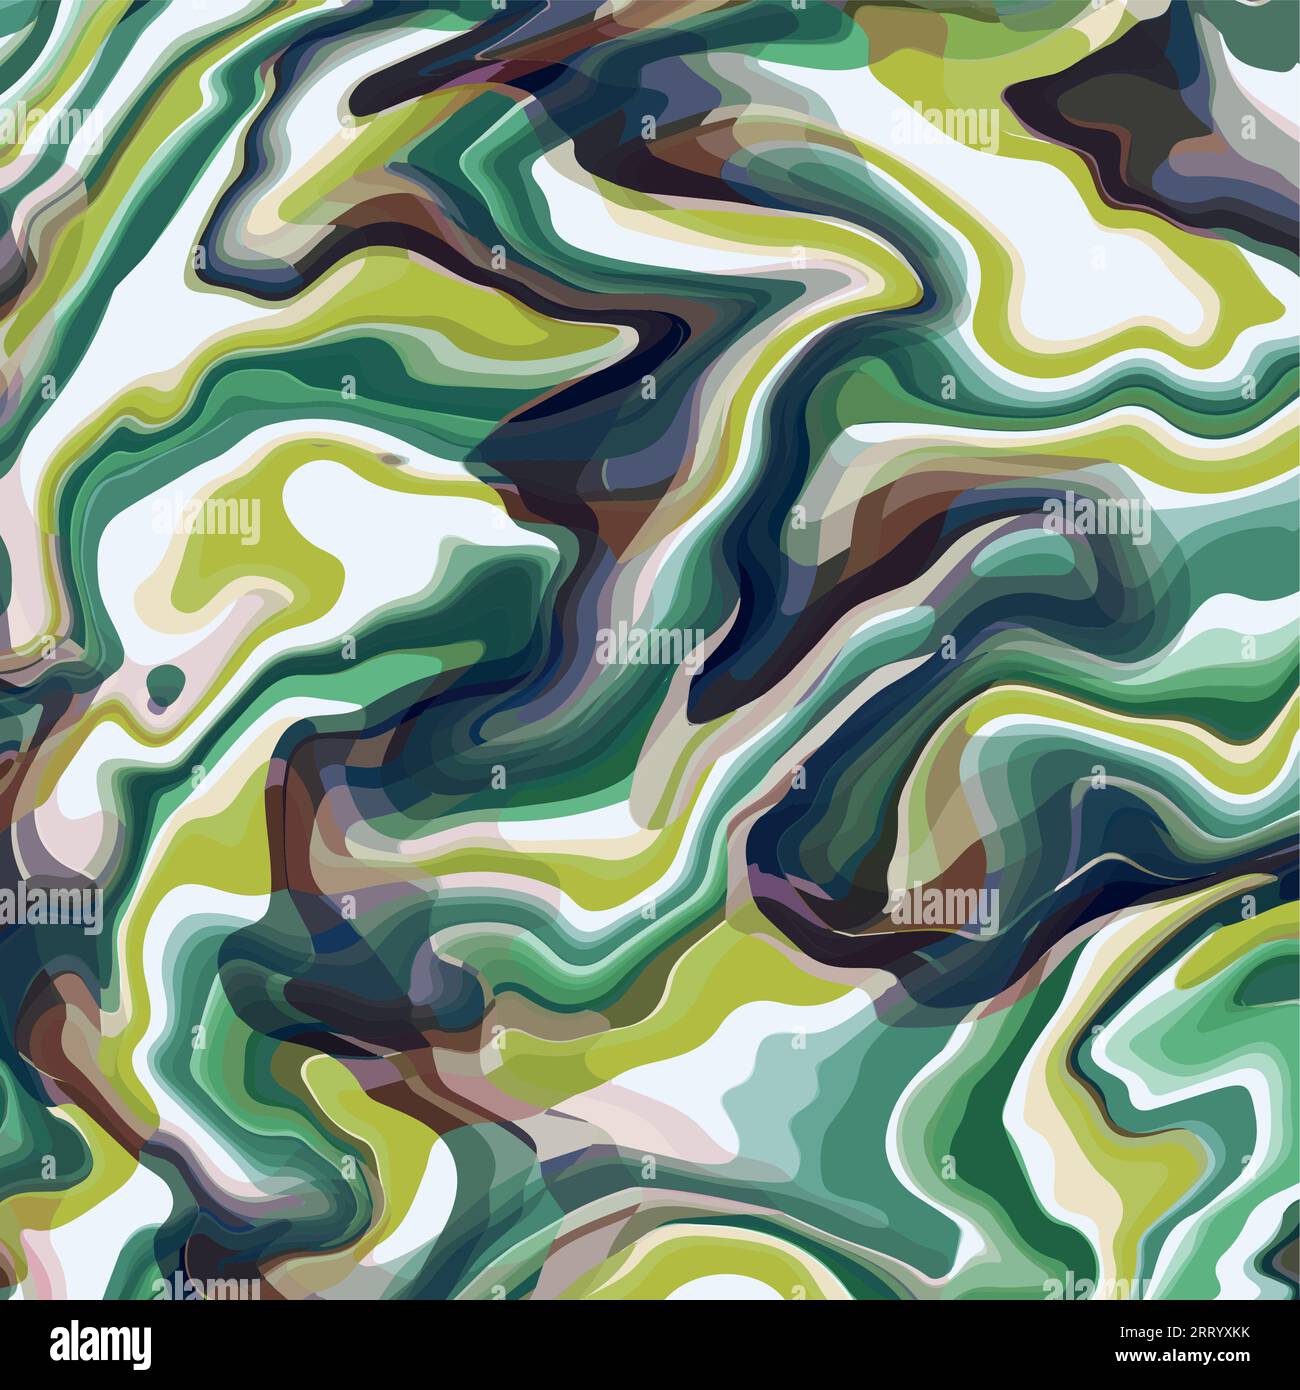 Modern amazon green liquid wave background. wallpaper, marbling effect, vector illustration, fashion, interior, wrapping Stock Vector